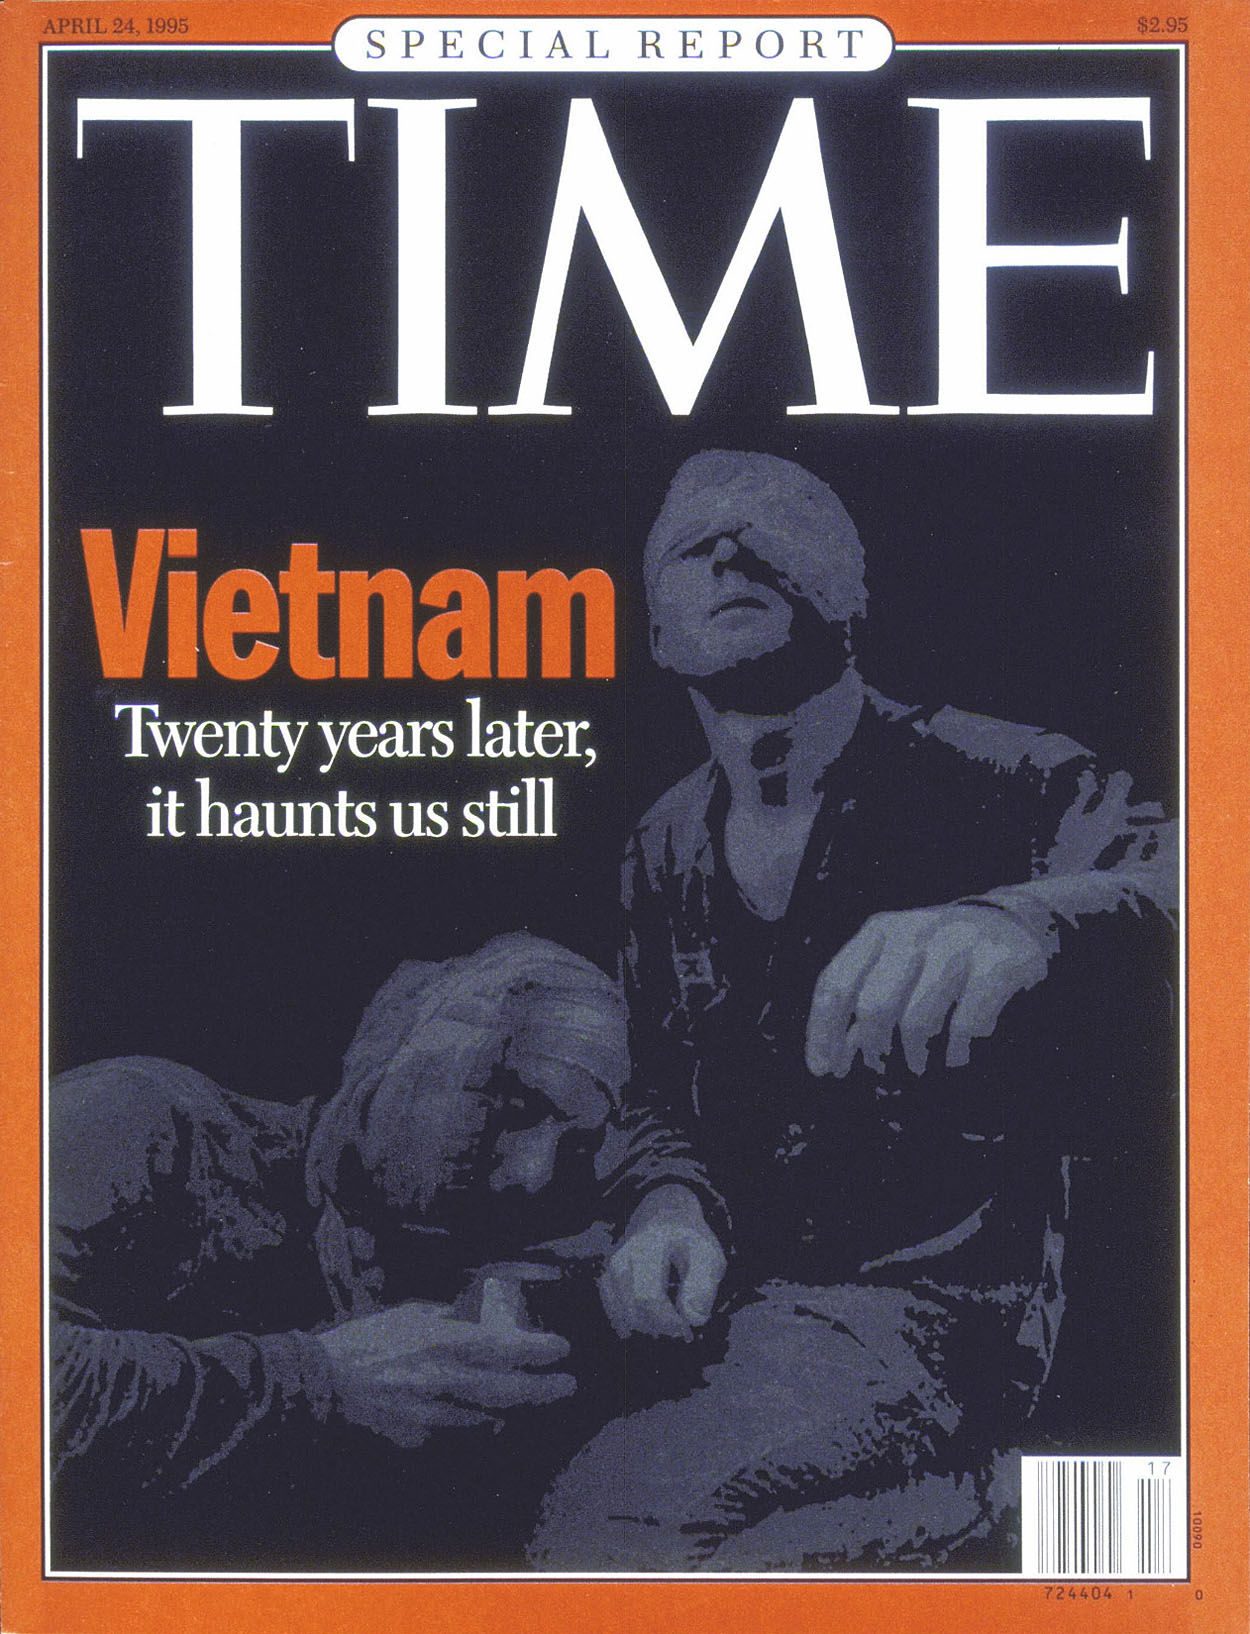 the cover of time magazine with two men shaking hands